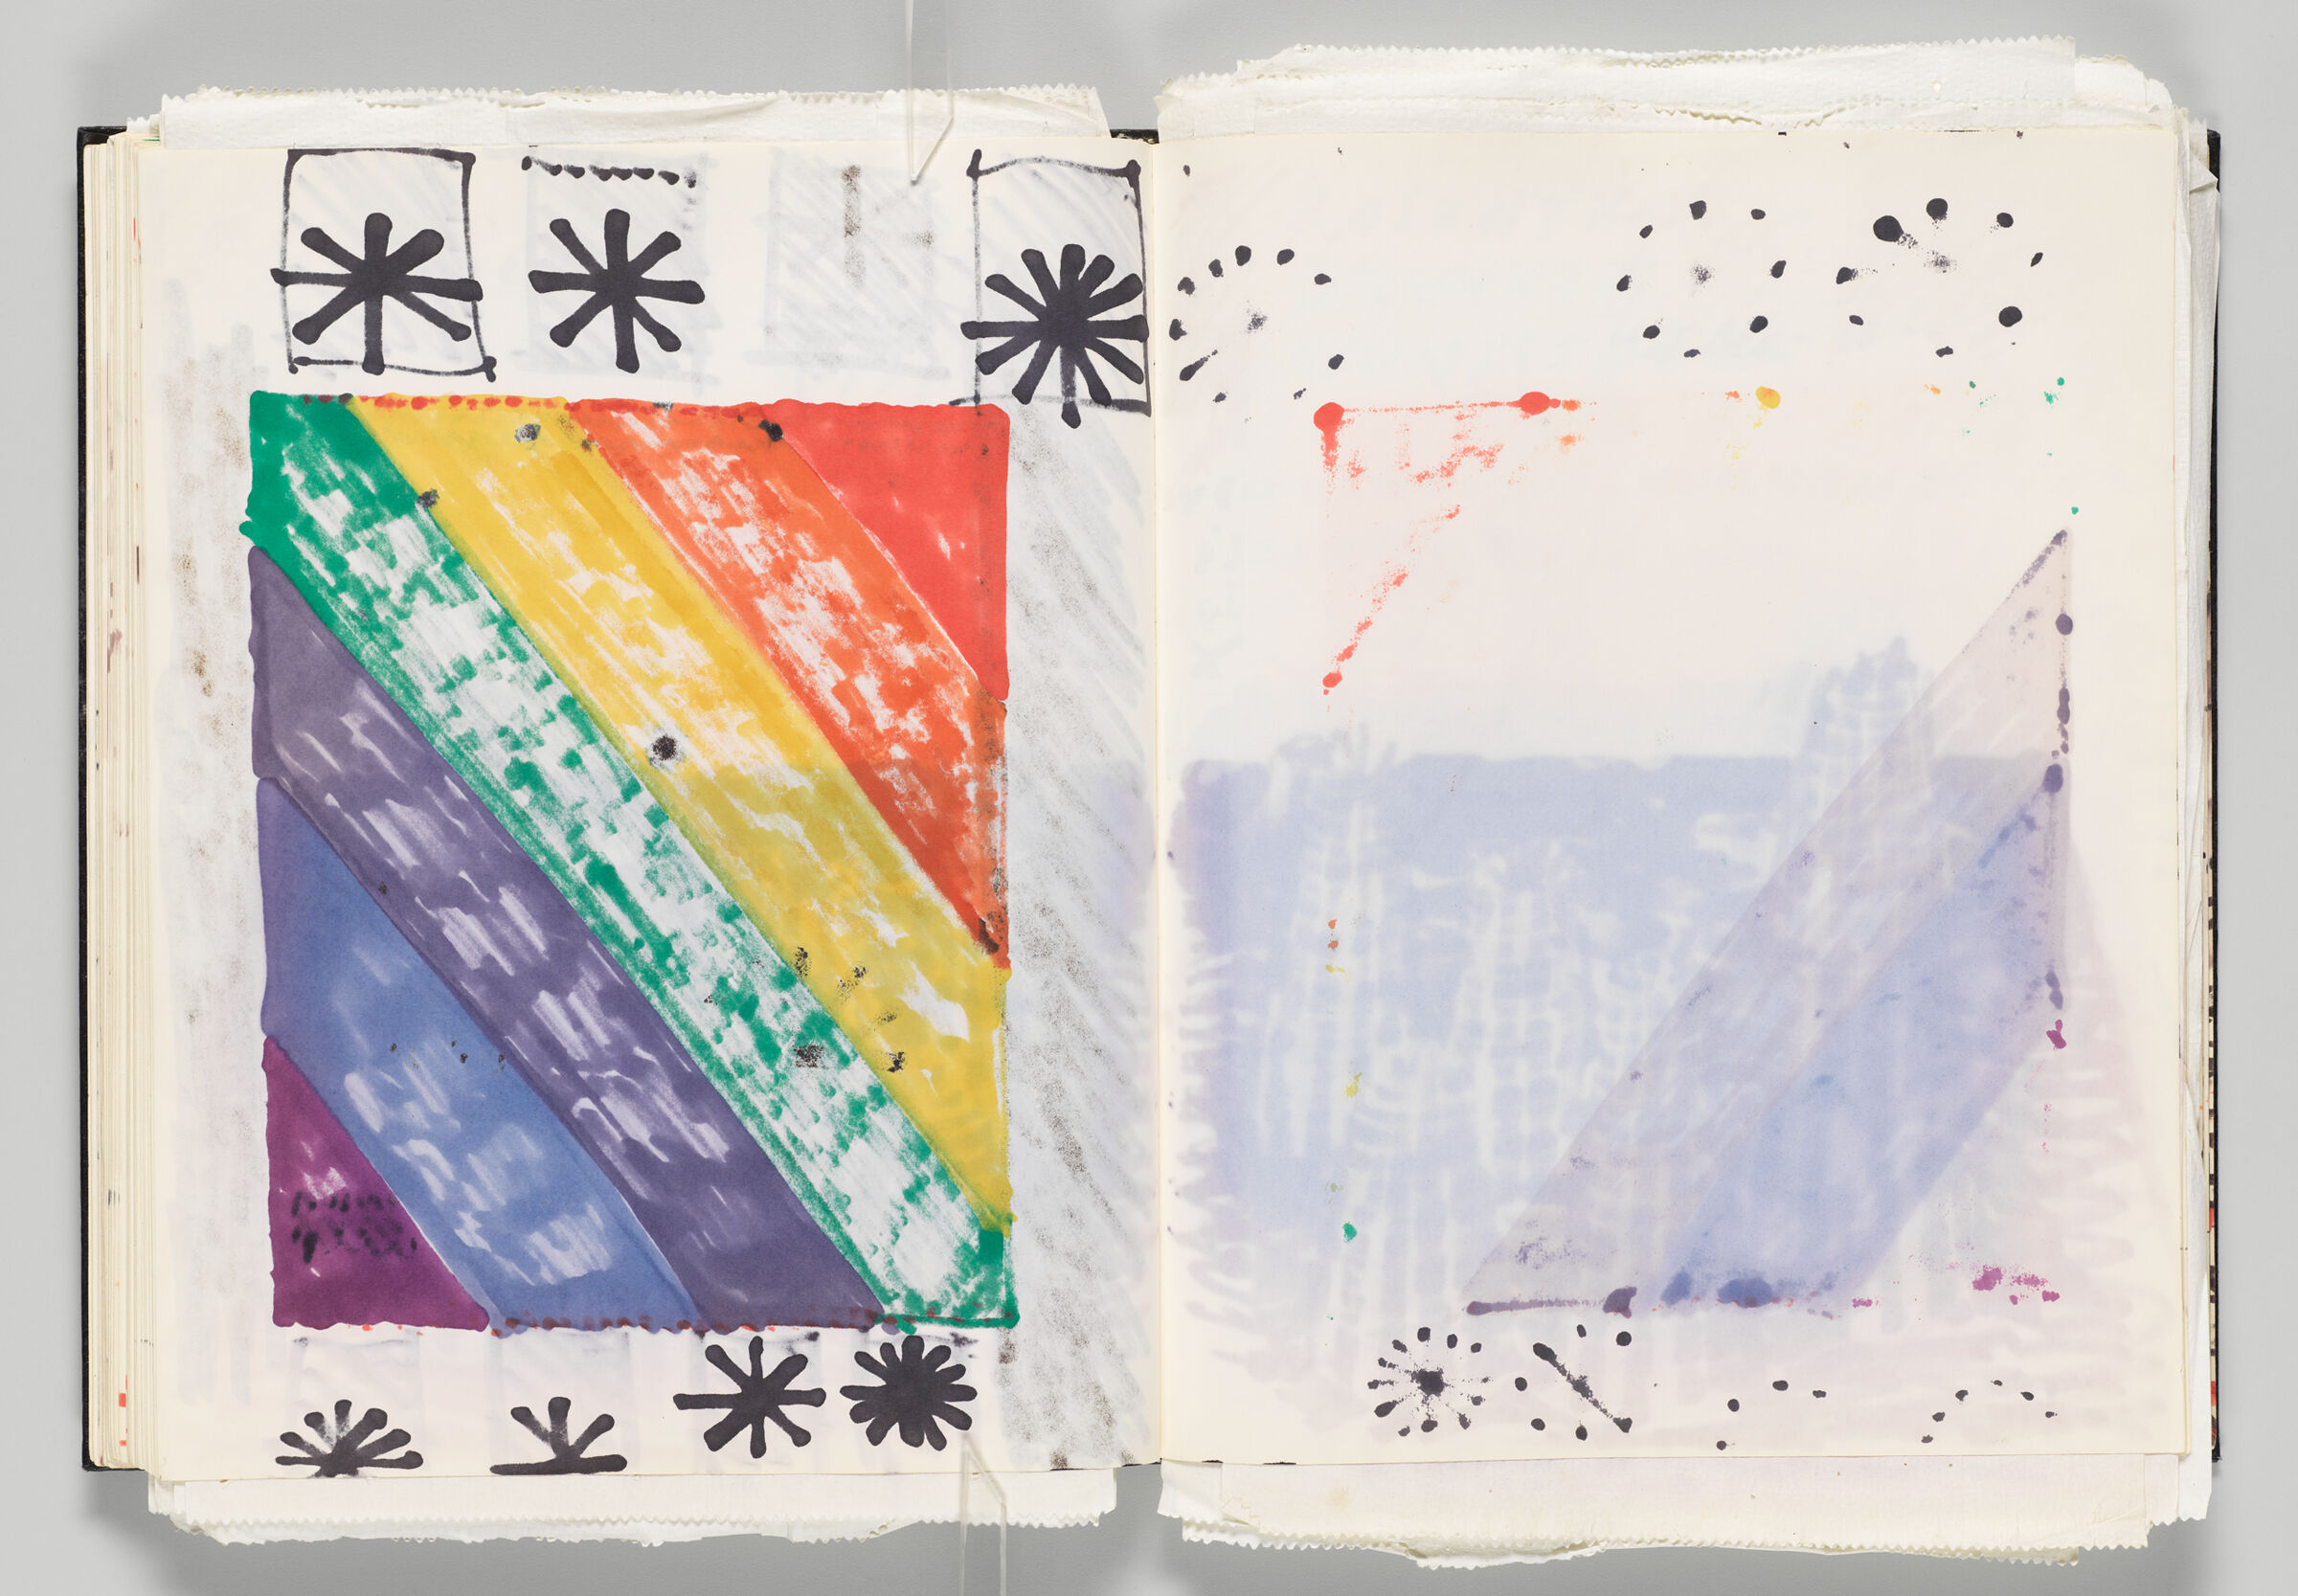 Untitled (Bleed-Through Of Previous Page, Left Page); Untitled (Overlapping Color Transfers, Right Page)